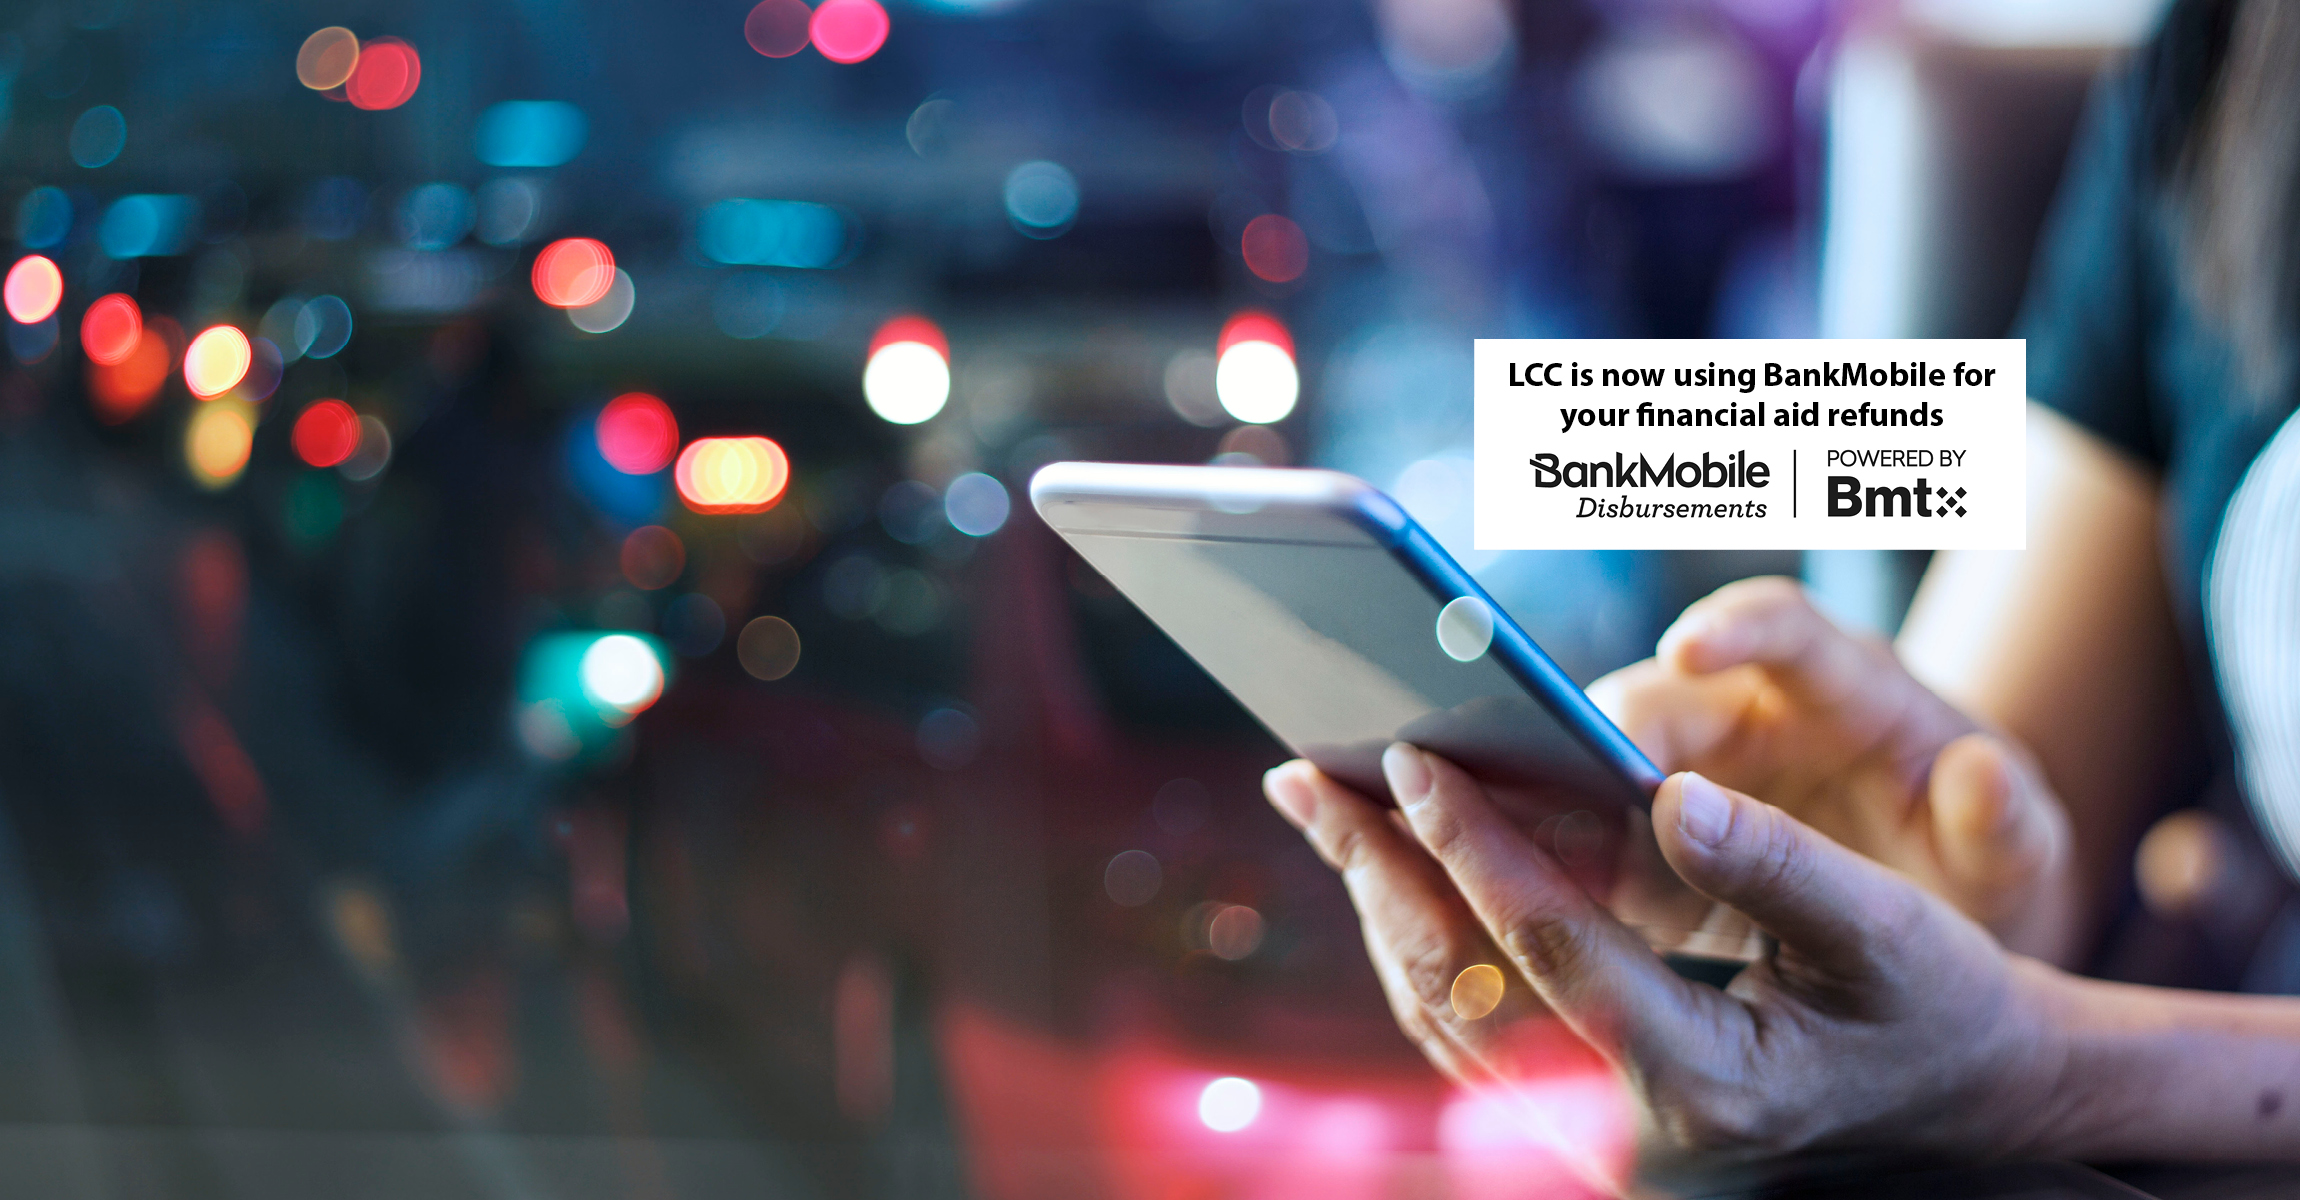 image of persons hands holding cell phone, words saying "LCC is now using BankMobile for your financial aid refunds" and the bank mobile logo